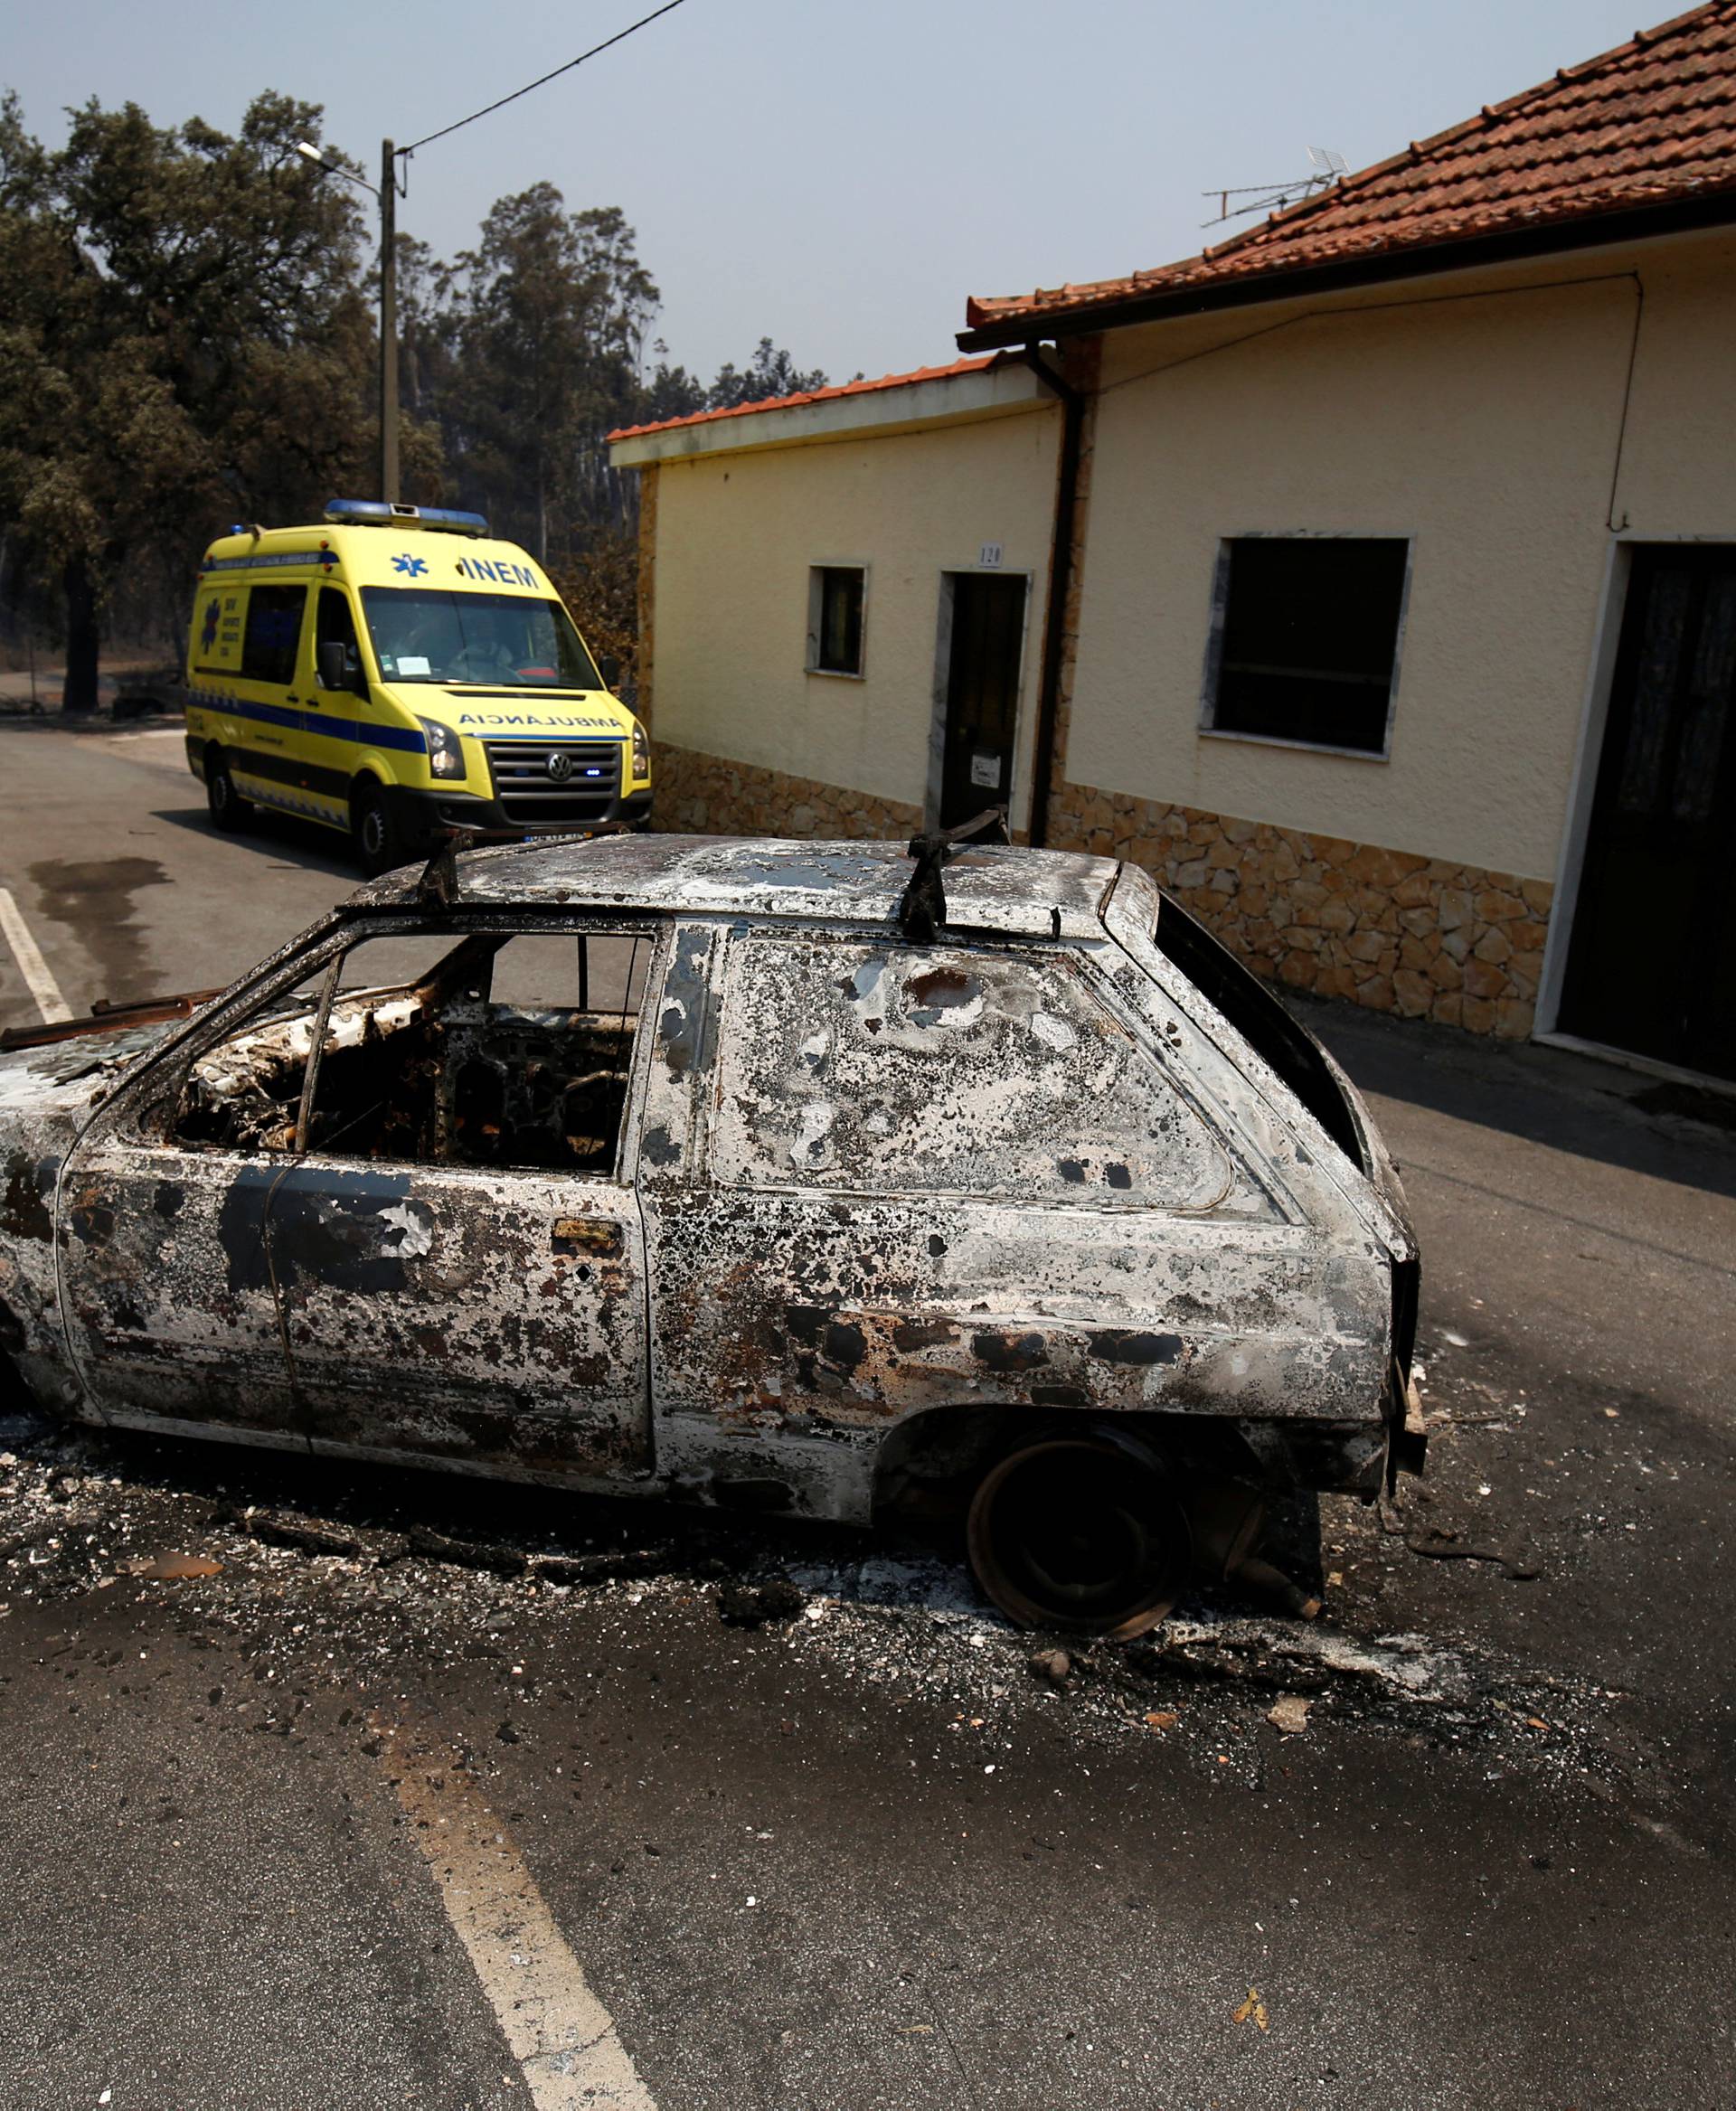 An ambulance drives past a burned car during a forest fire in Figueiro dos Vinhos